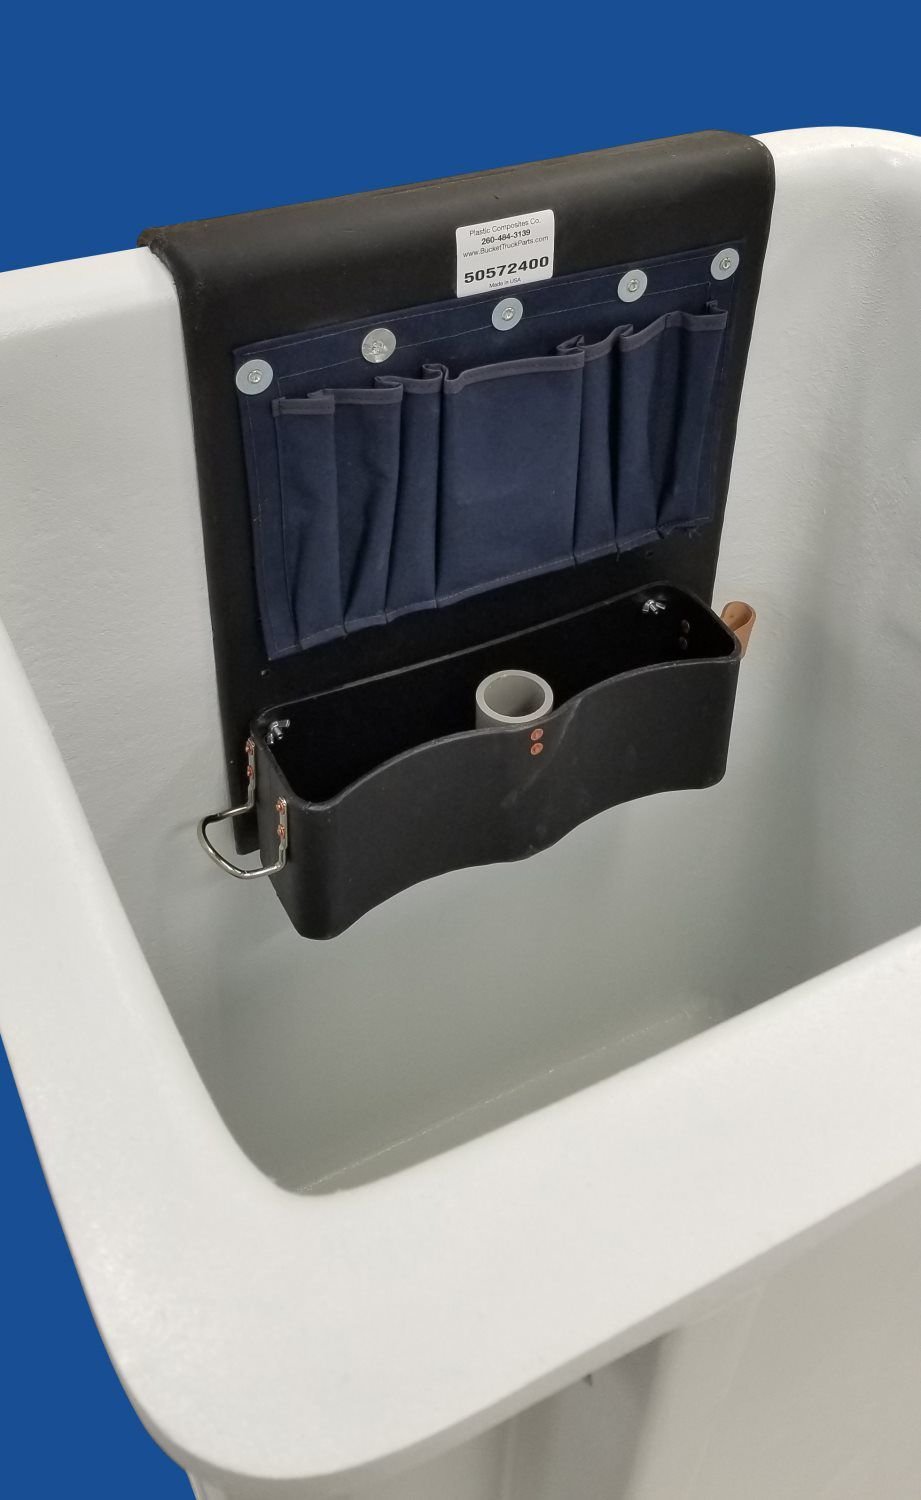 Thigh Brace Tool Tray - Tool Apron On Top